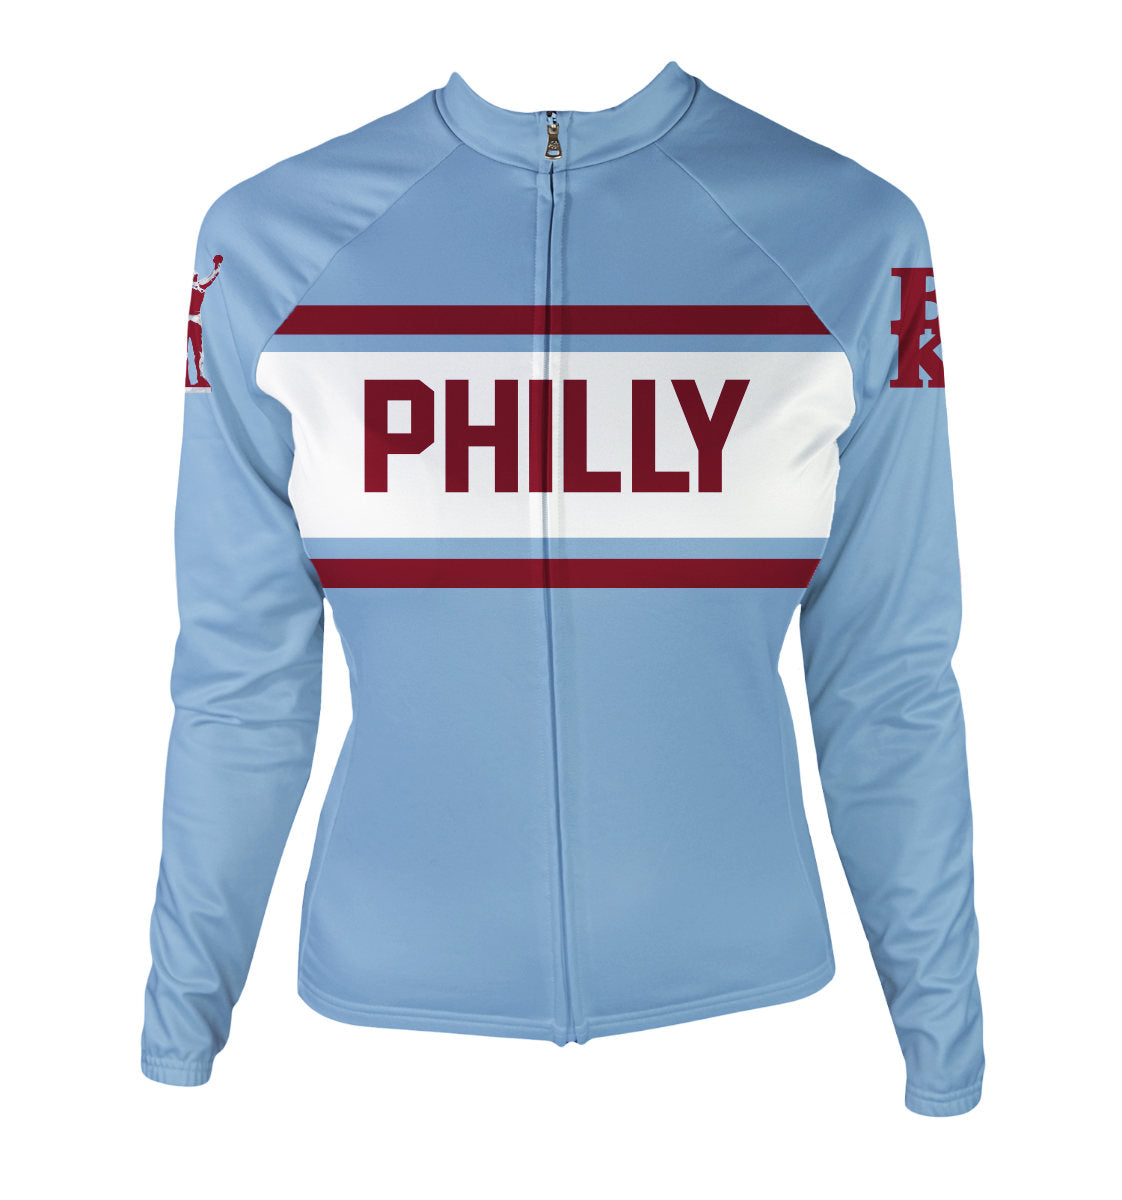 Philly Retro Blue Women's FINAL SALE XS & SMALL ONLY